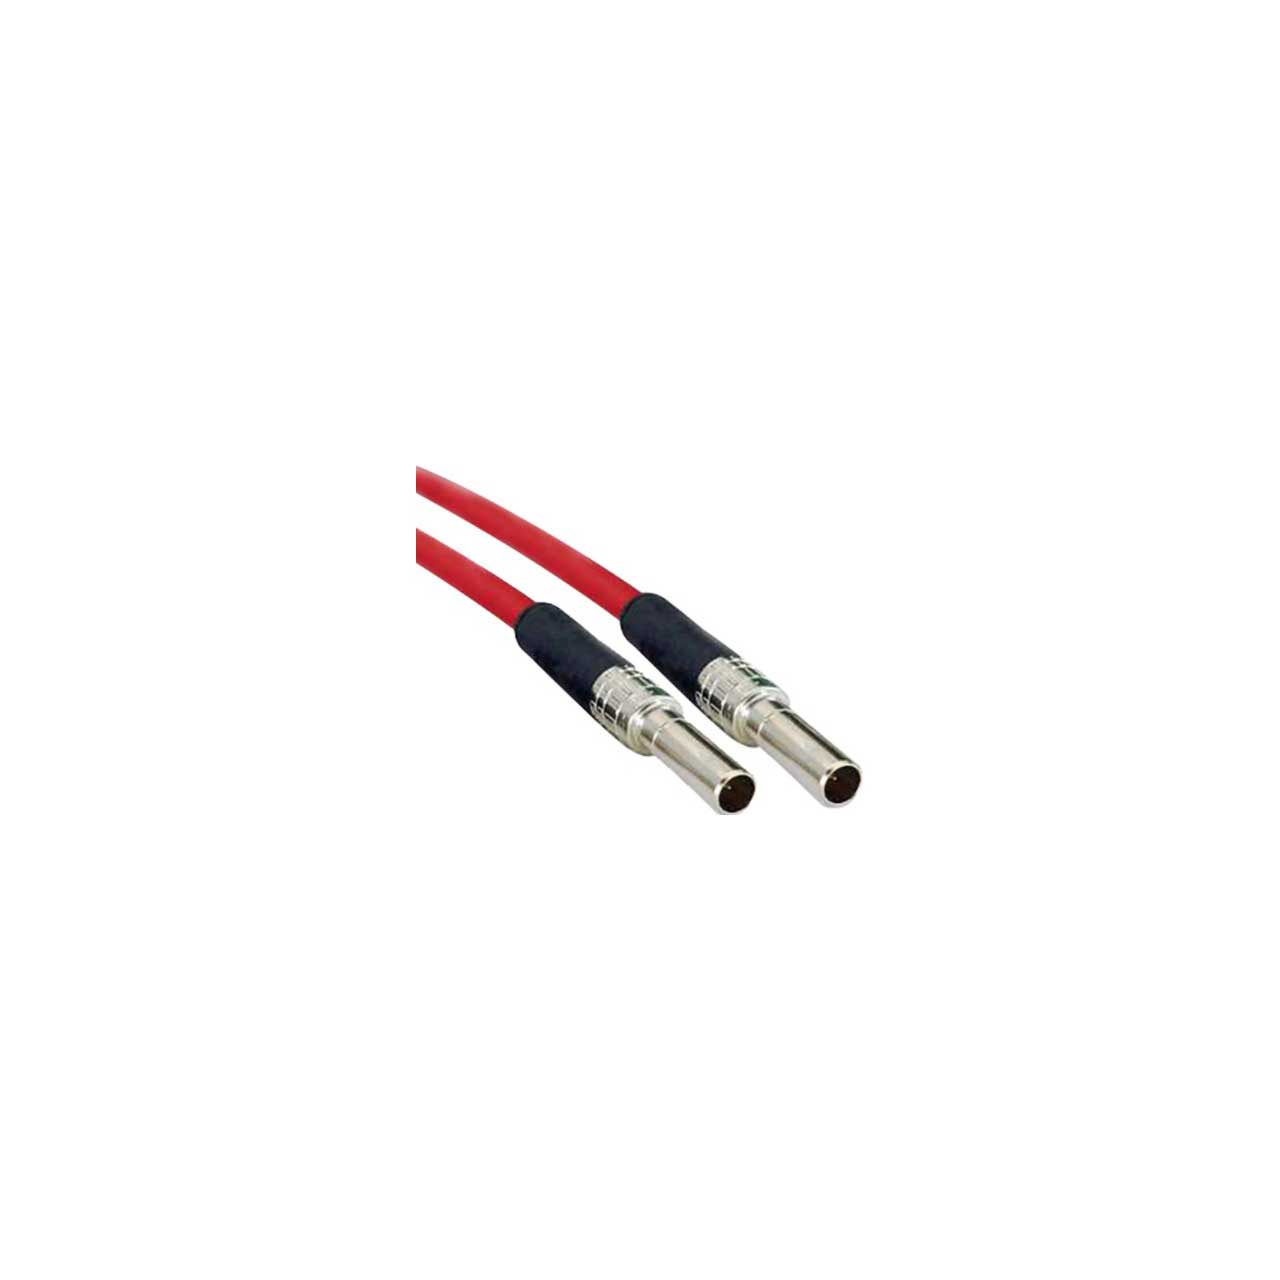 AVP MPC-15-Red Midsize 3G HD-SDI Video Patchcord - Red - 1.5 Foot MPC-15-RED